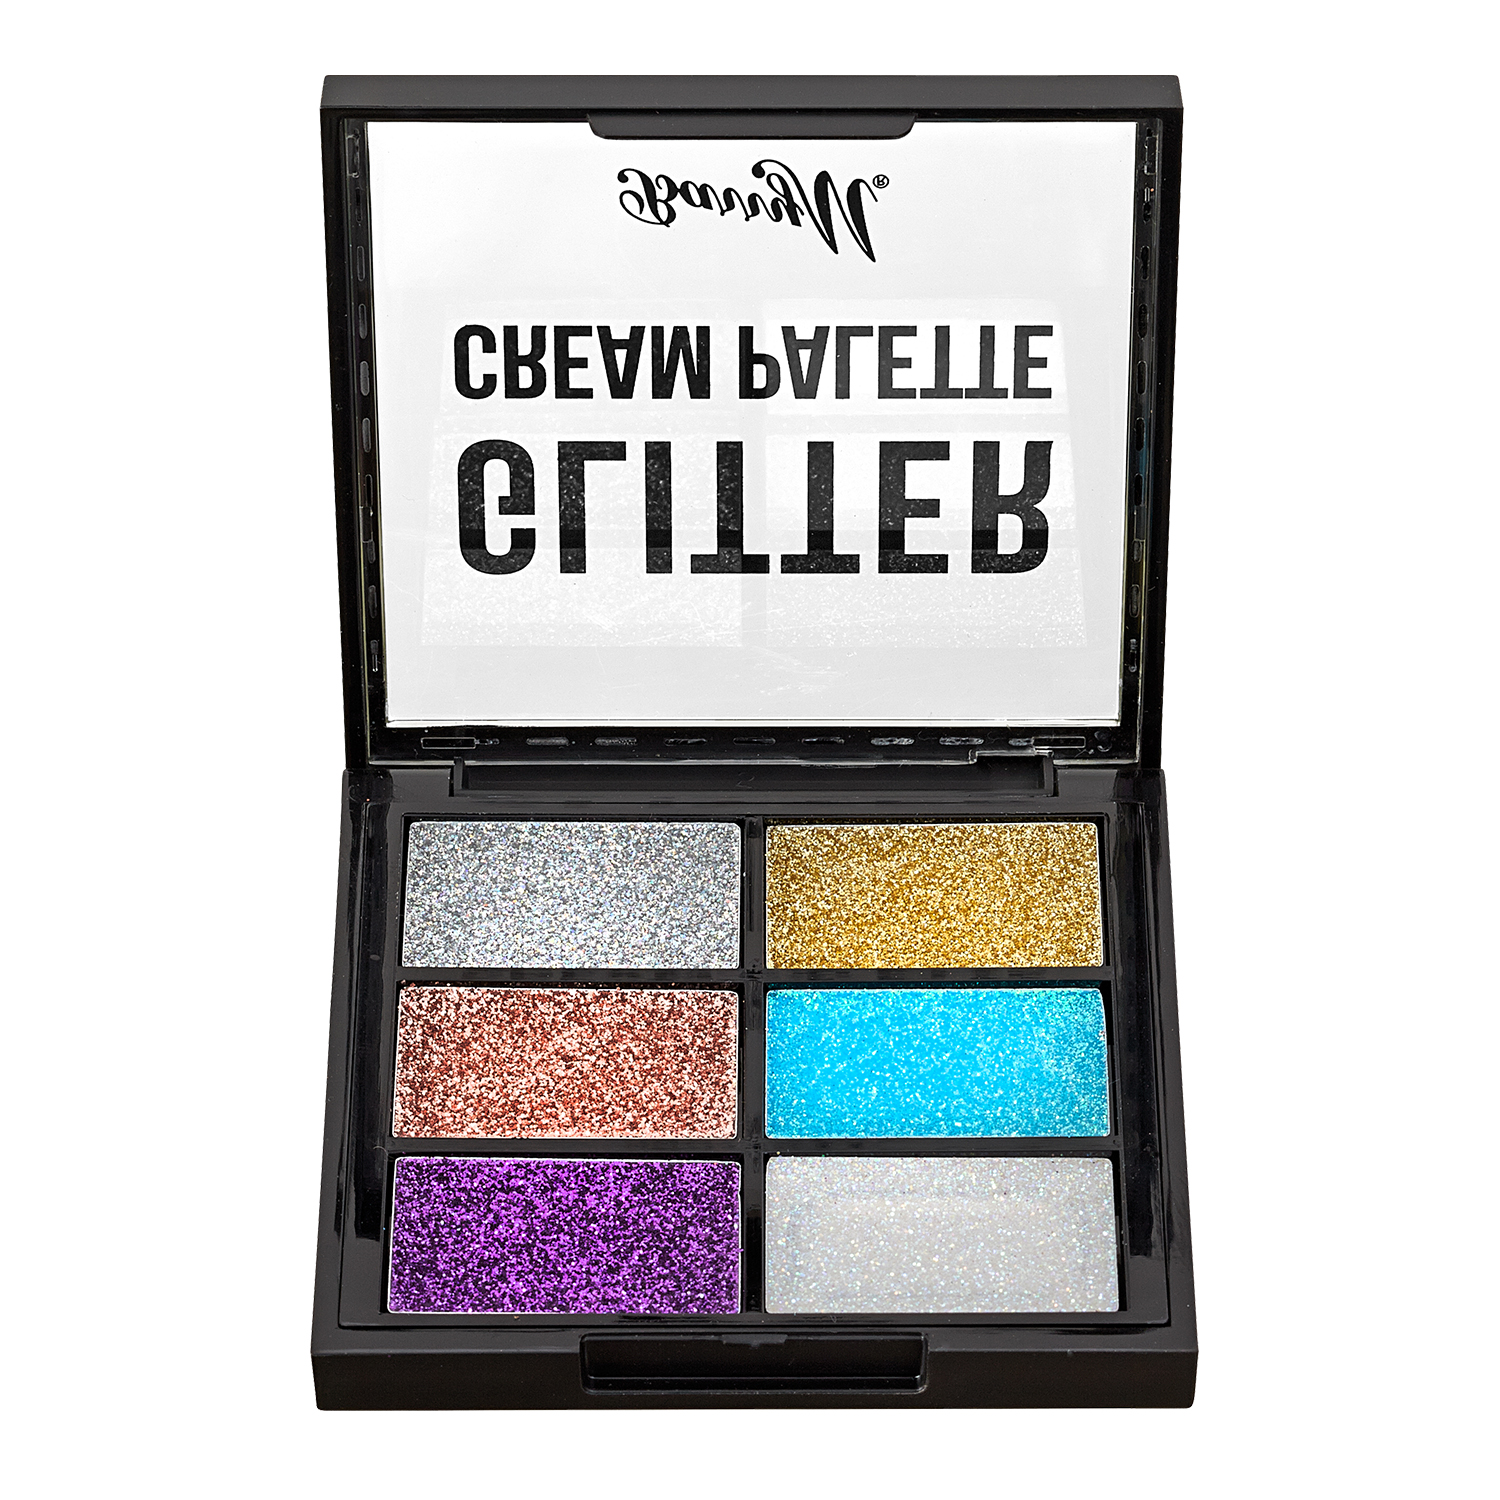 The Xmas Beauty Gifts: Stocking Fillers